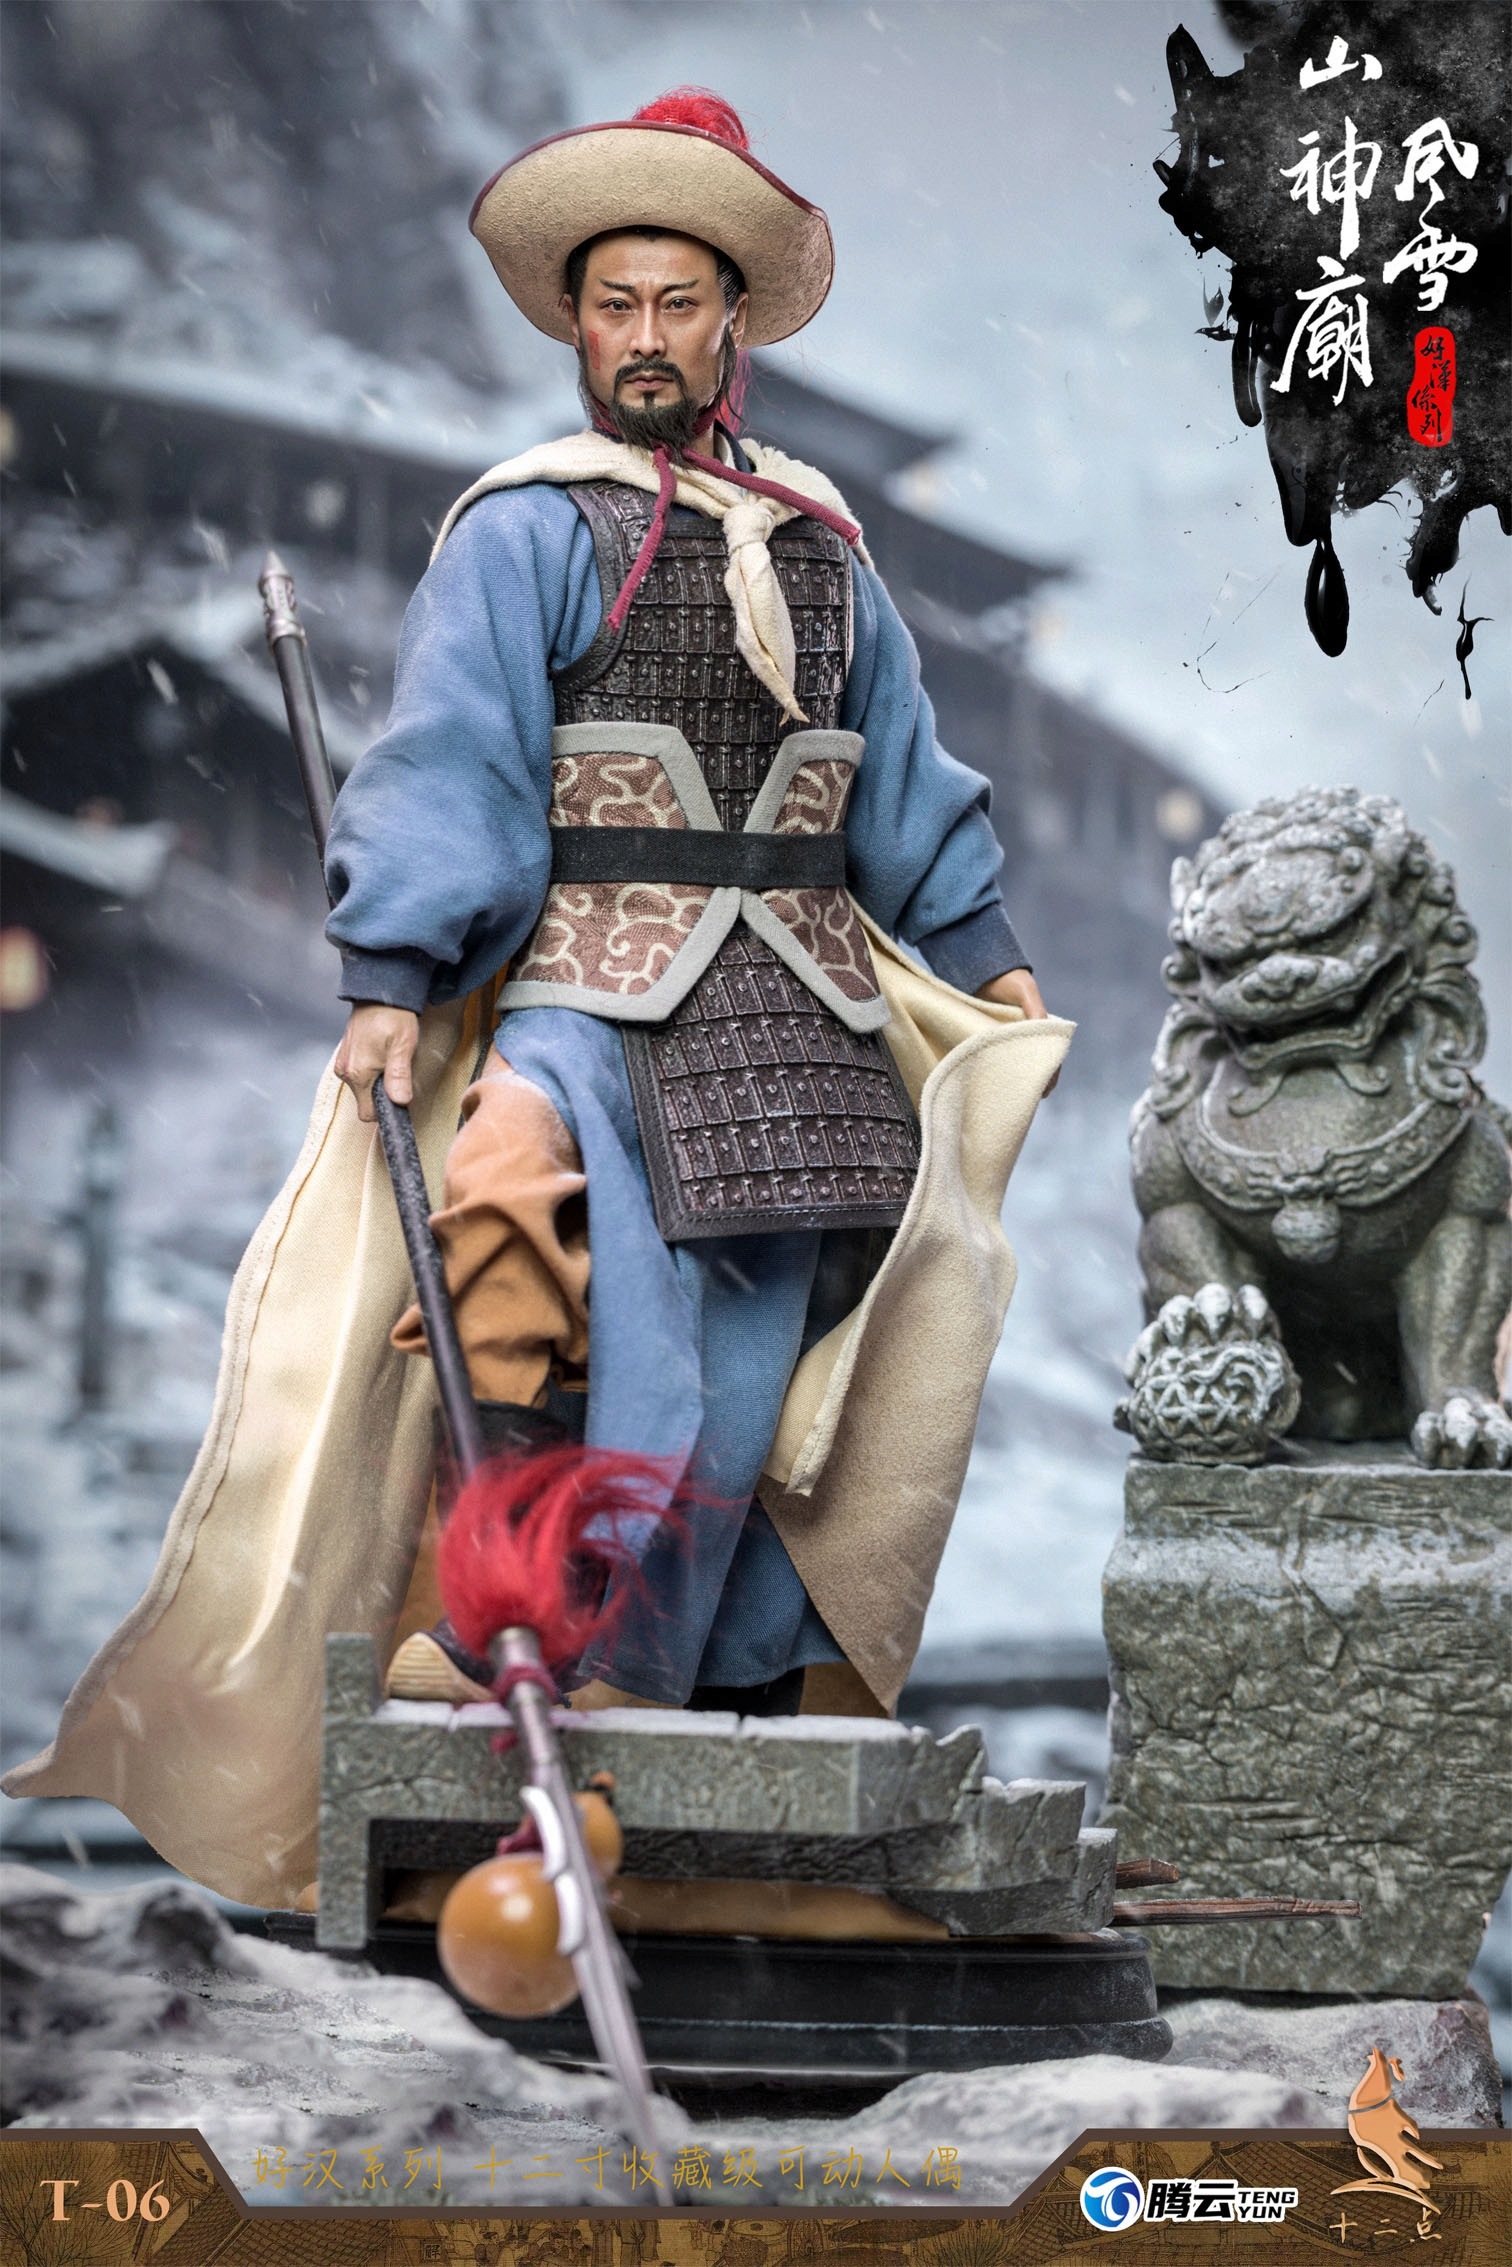 NEW PRODUCT: Twelve - Hero Series - Leopard Head Lin Chong Fengxue Mountain Temple Action Figure (T-05 /T-06) 2335